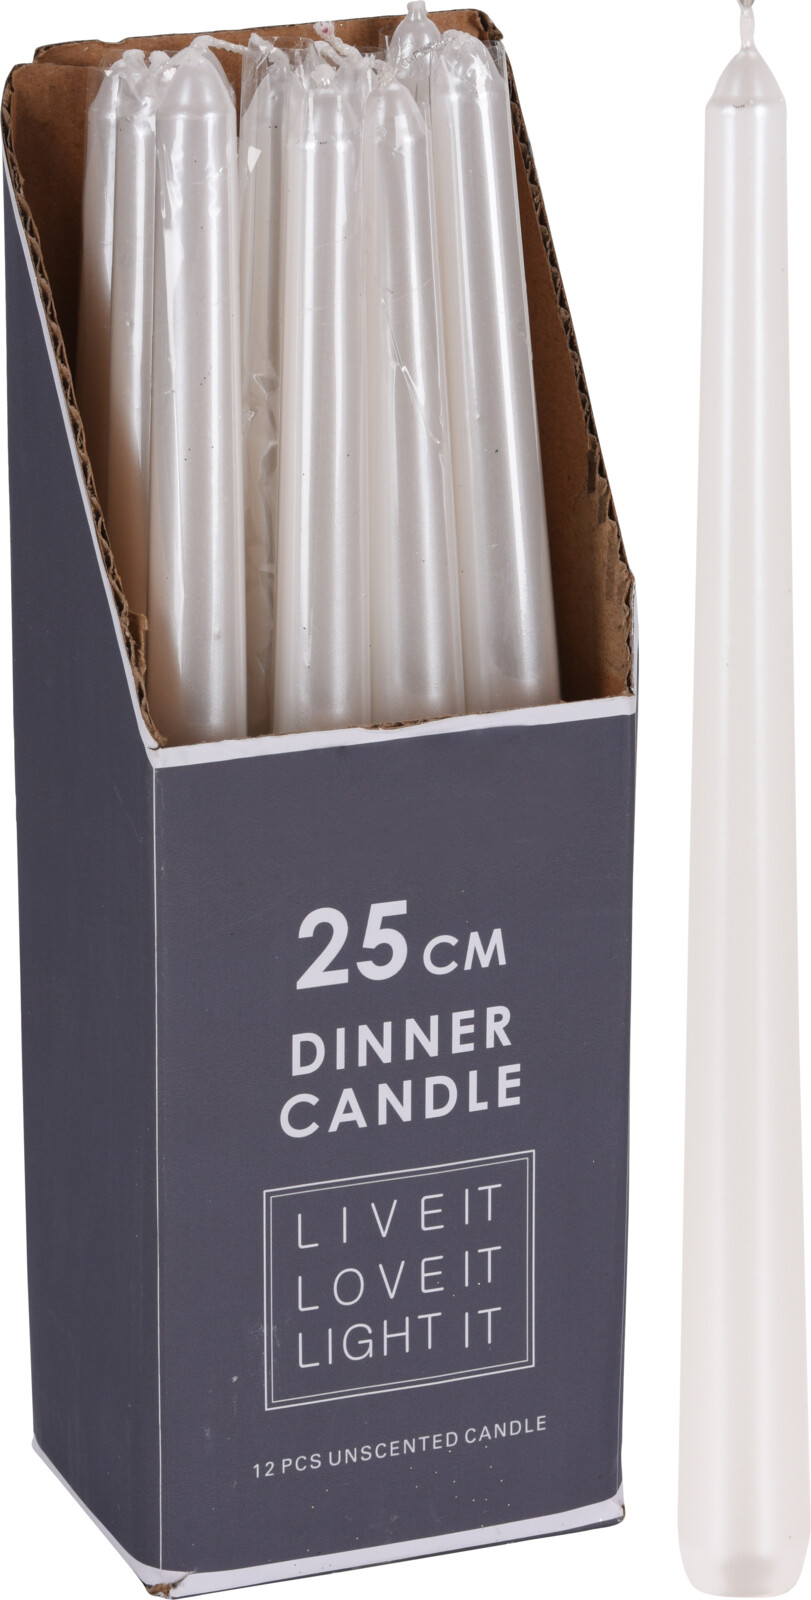 DINNER CANDLE WHITE 25CM